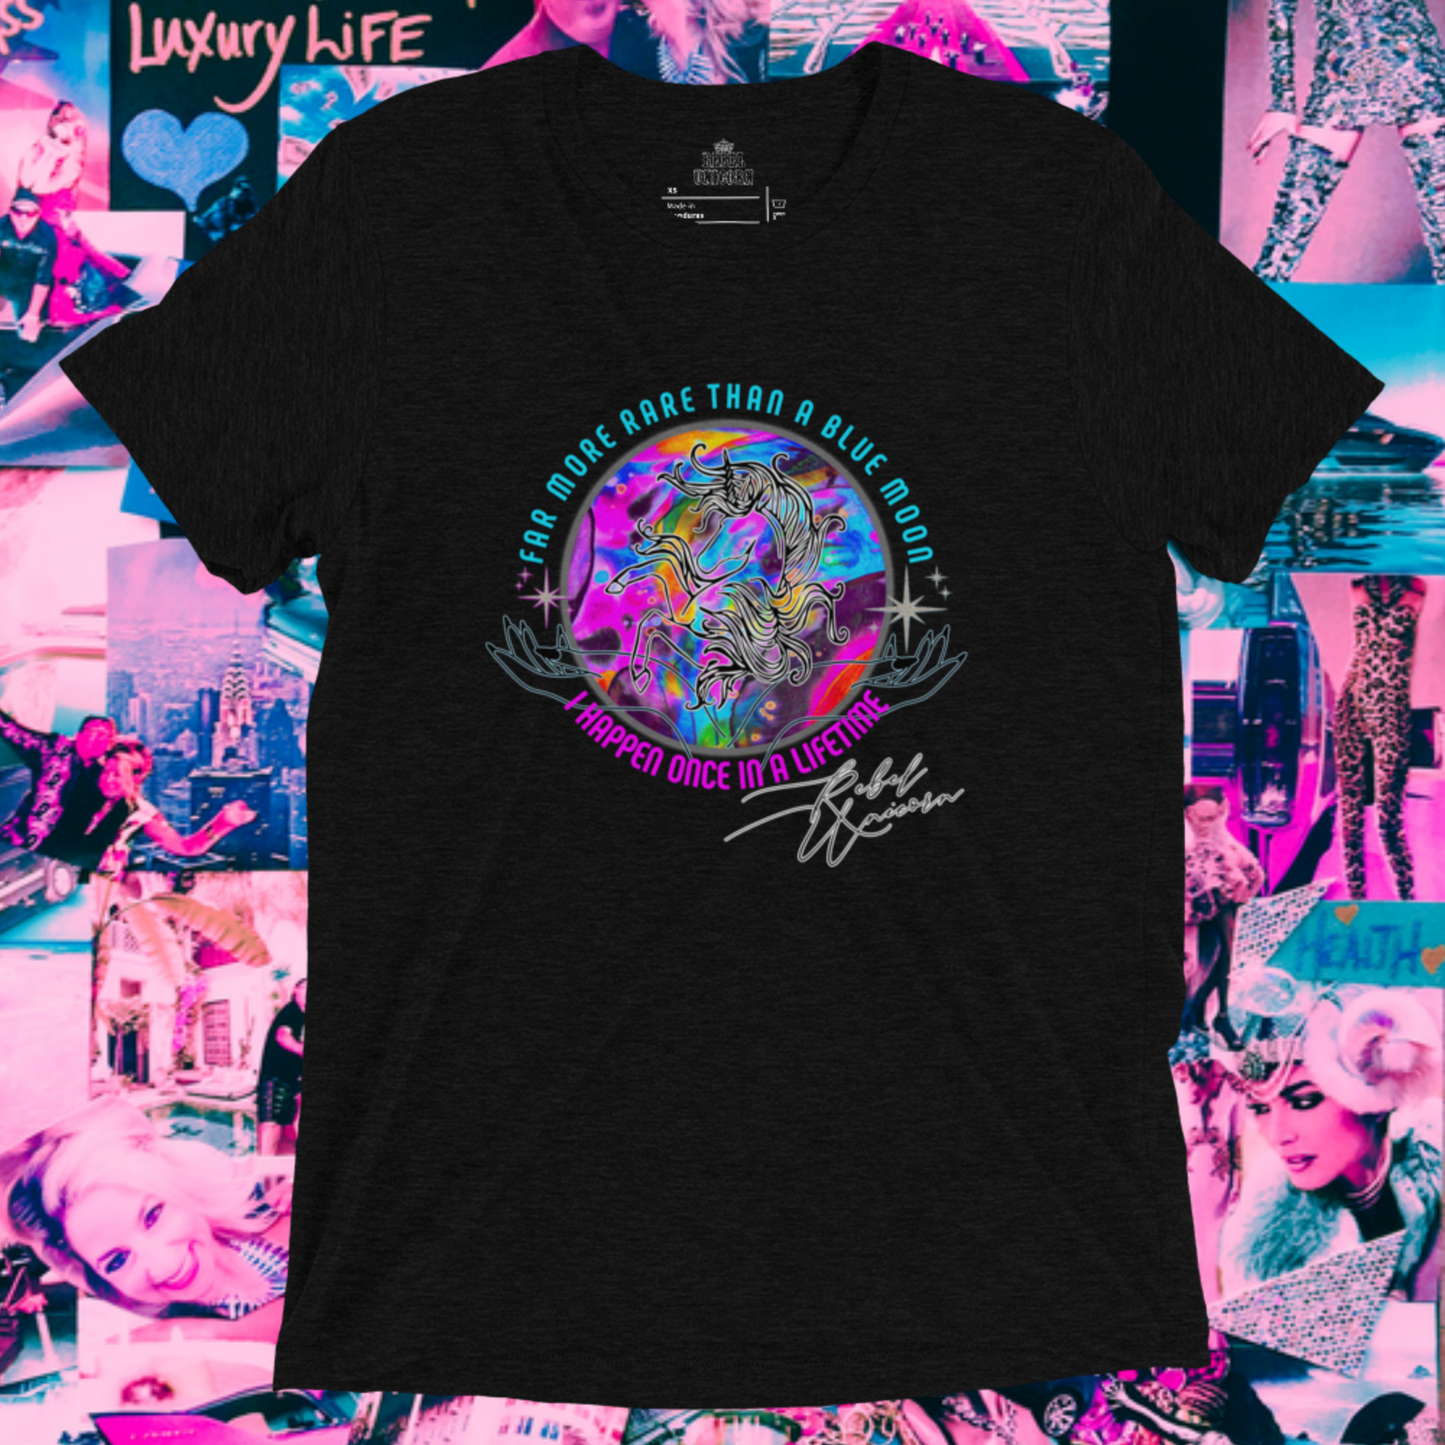 Once In A Lifetime Tee